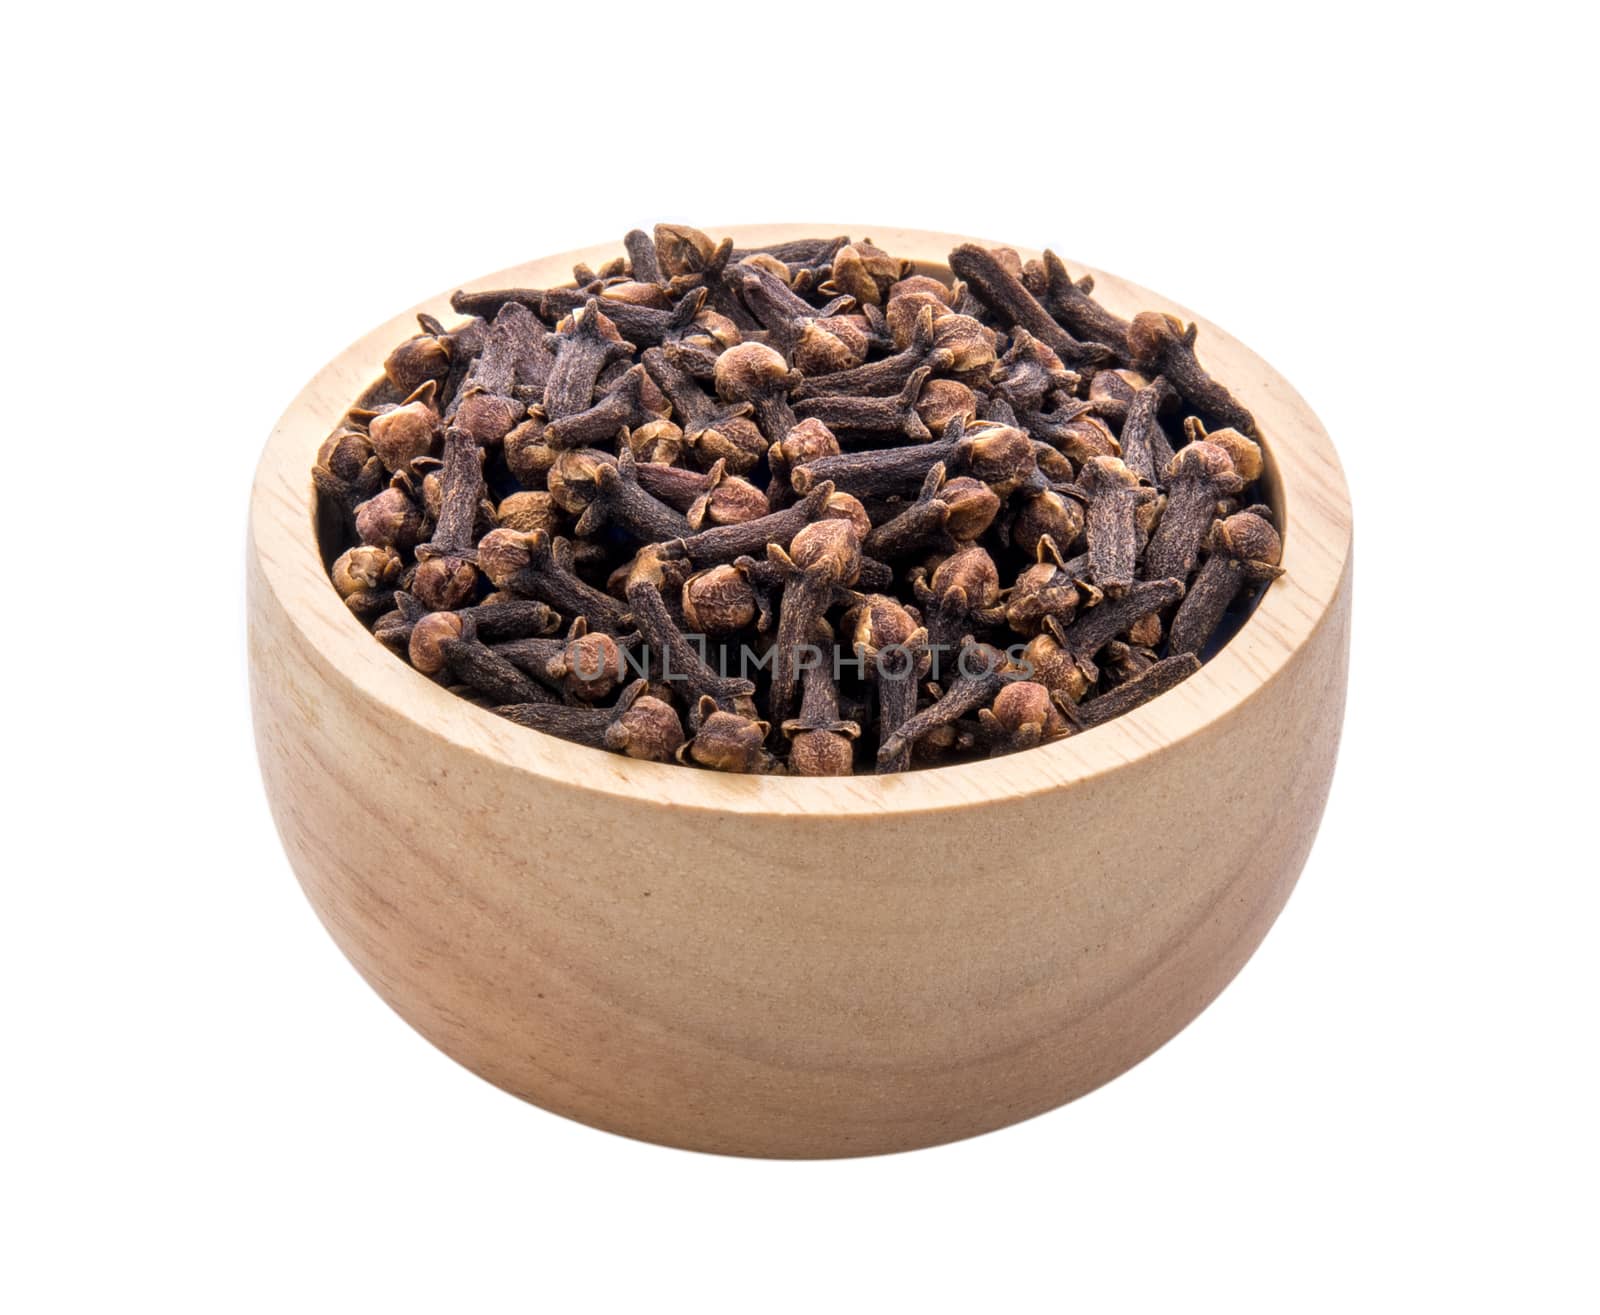 cloves spices in wood bowl on white background  by sommai